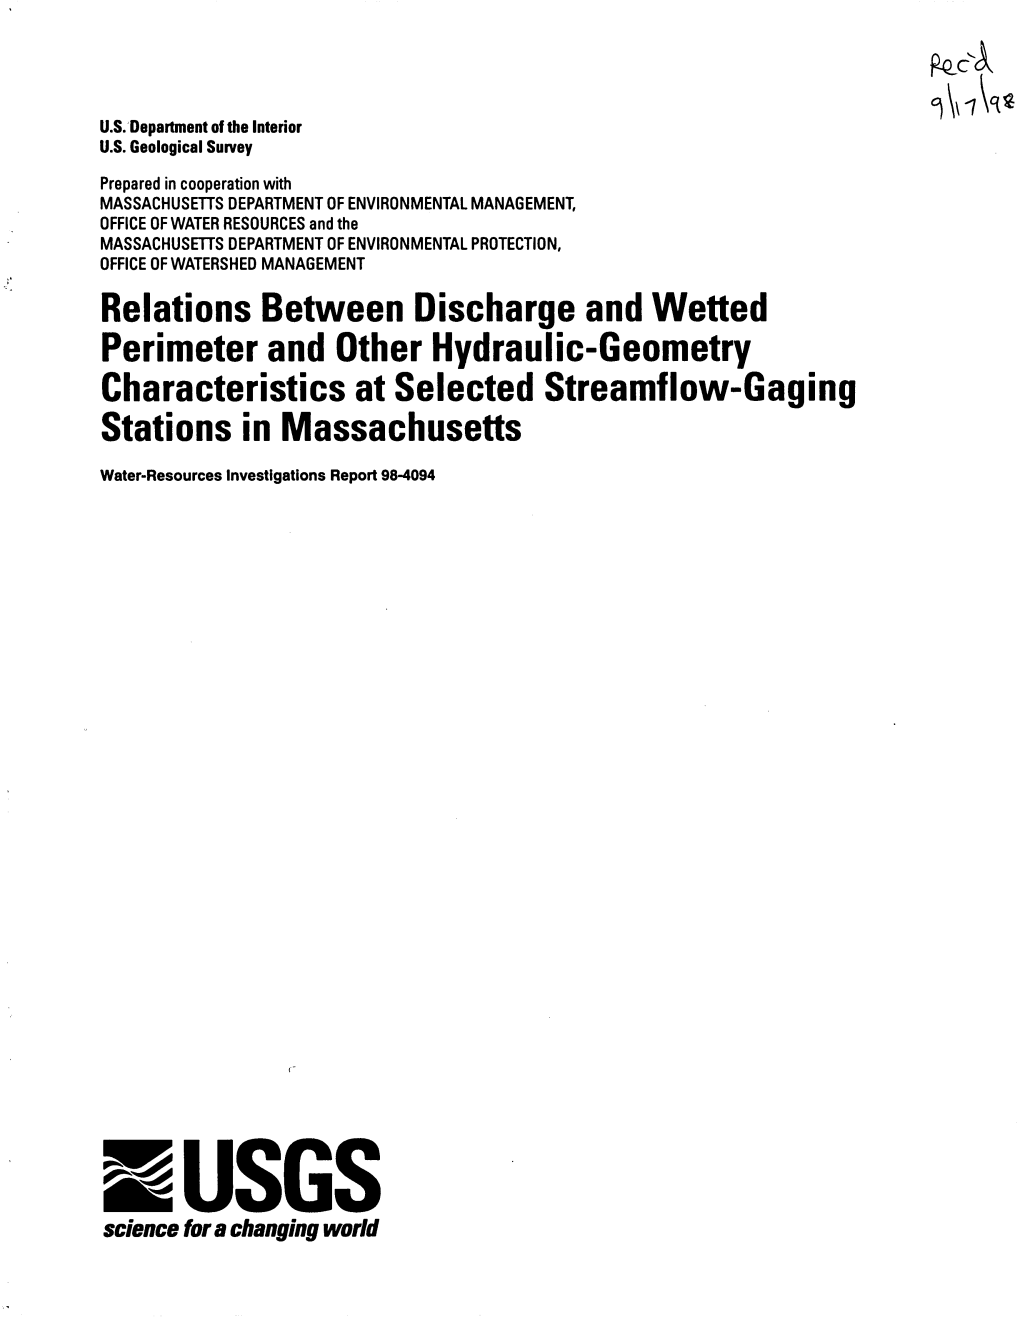 Relations Between Discharge and Wetted Perimeter and Other Hydraulic-Geometry Characteristics at Selected Streamflow-Gaging Stations in Massachusetts